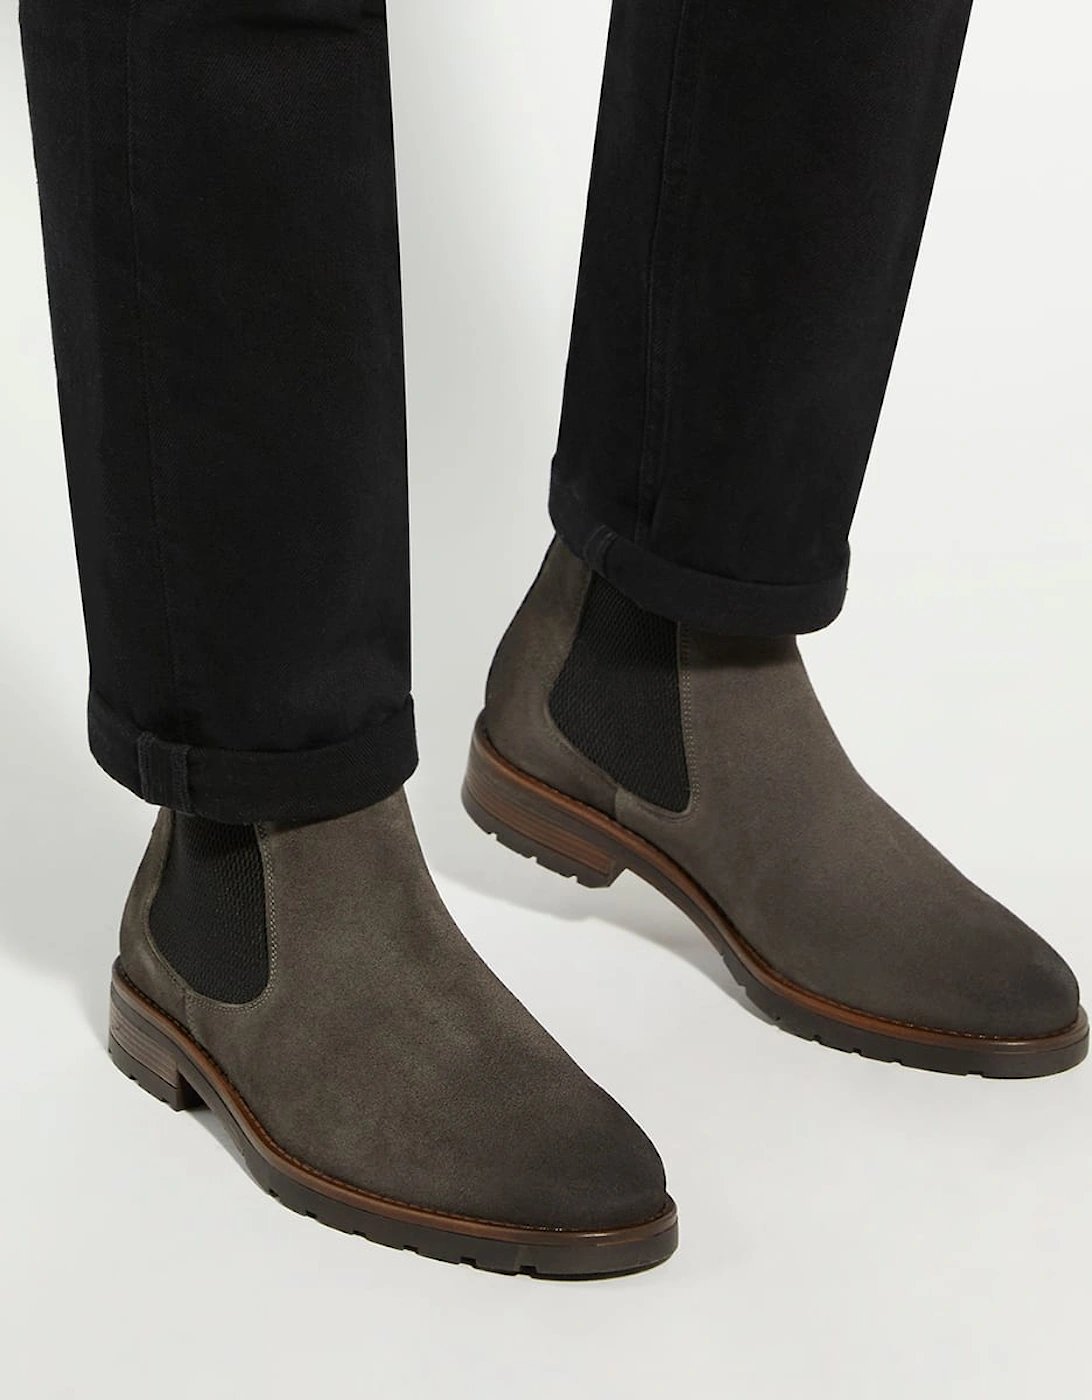 Mens Chelty - Brushed Suede Chelsea Boots